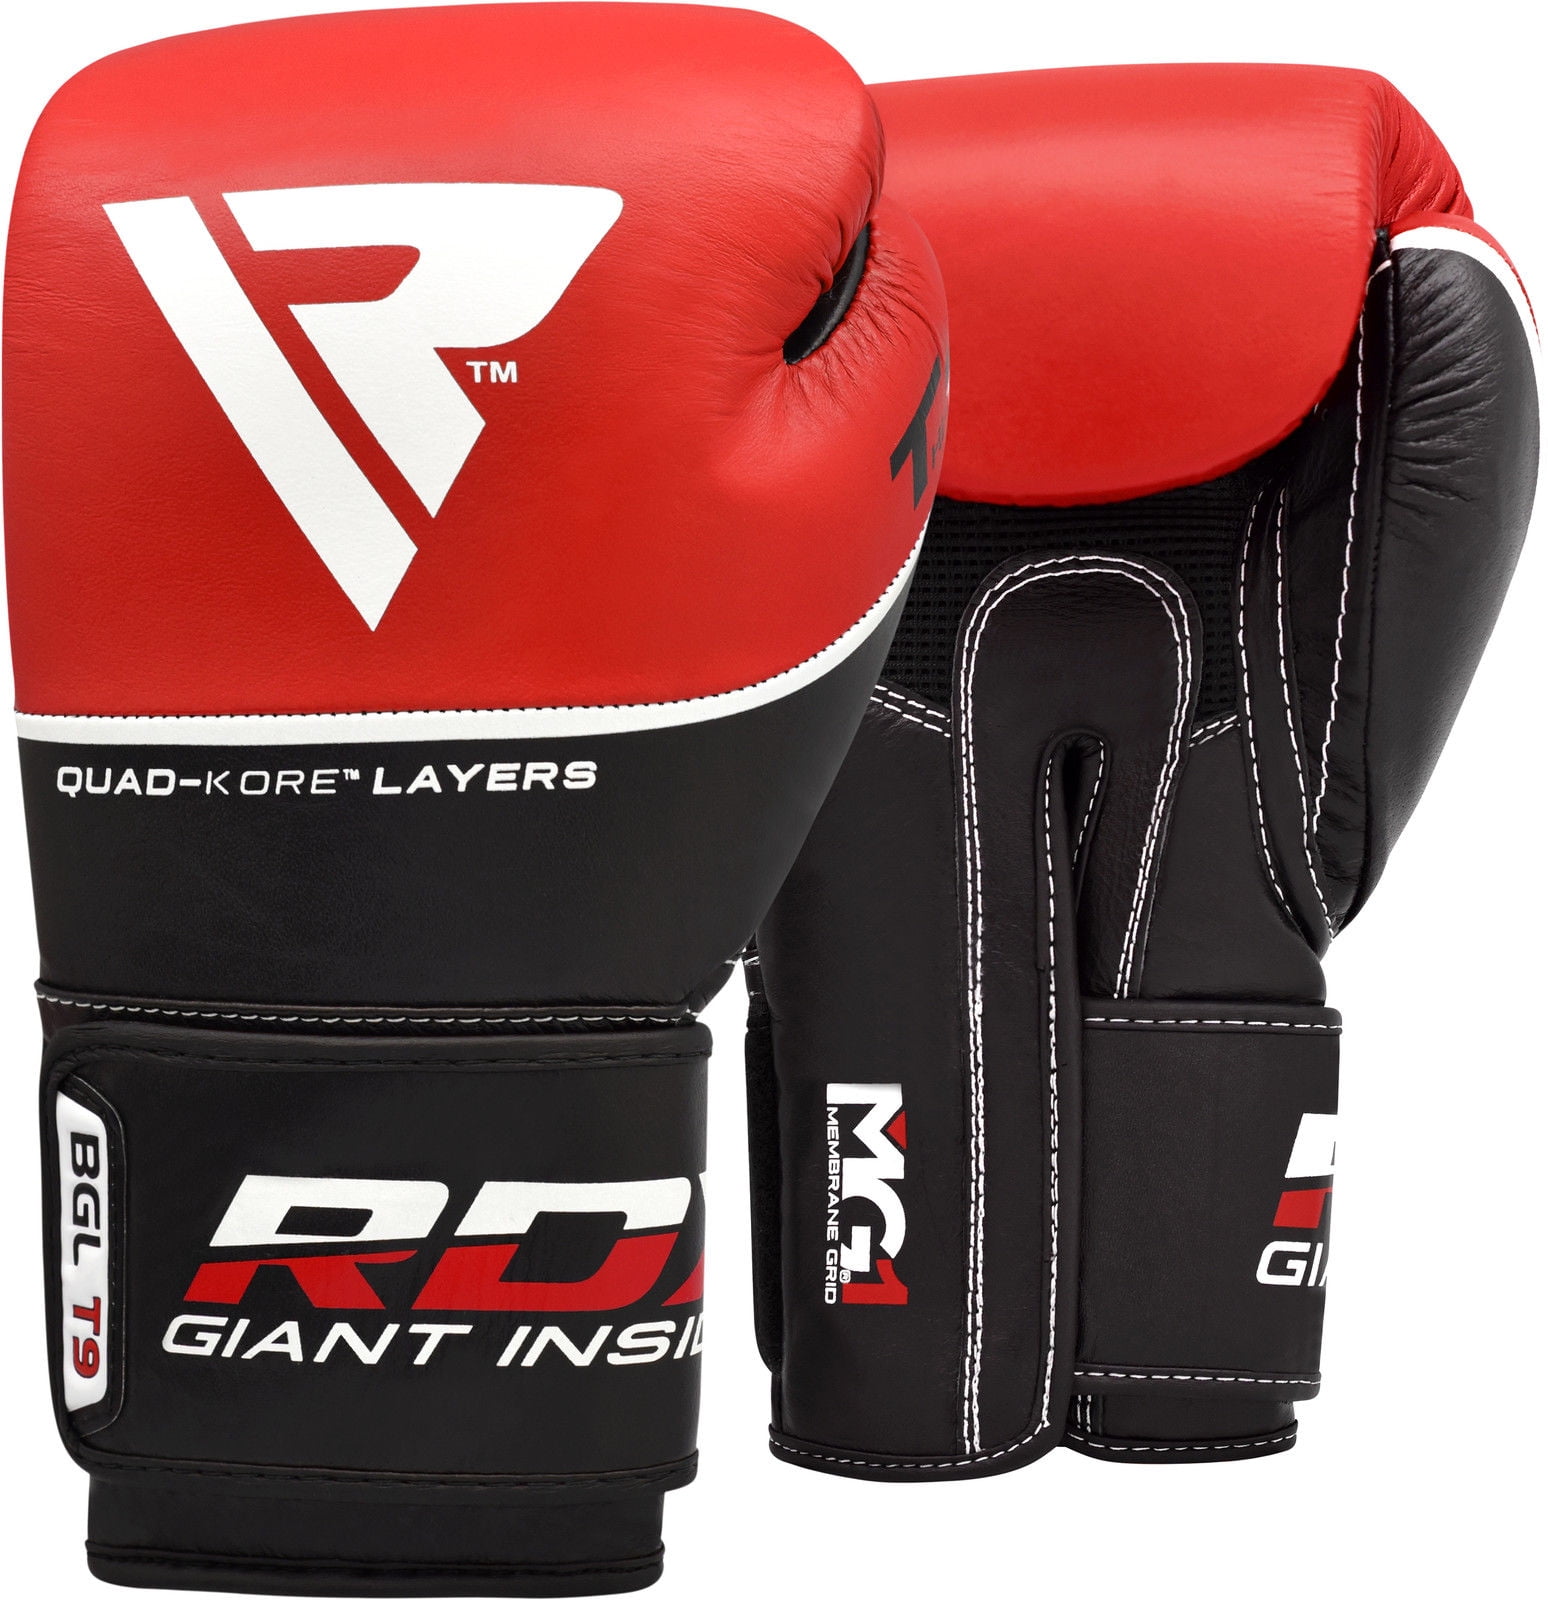 training sparring  glove made of genuine cowhide leather. Boxing 